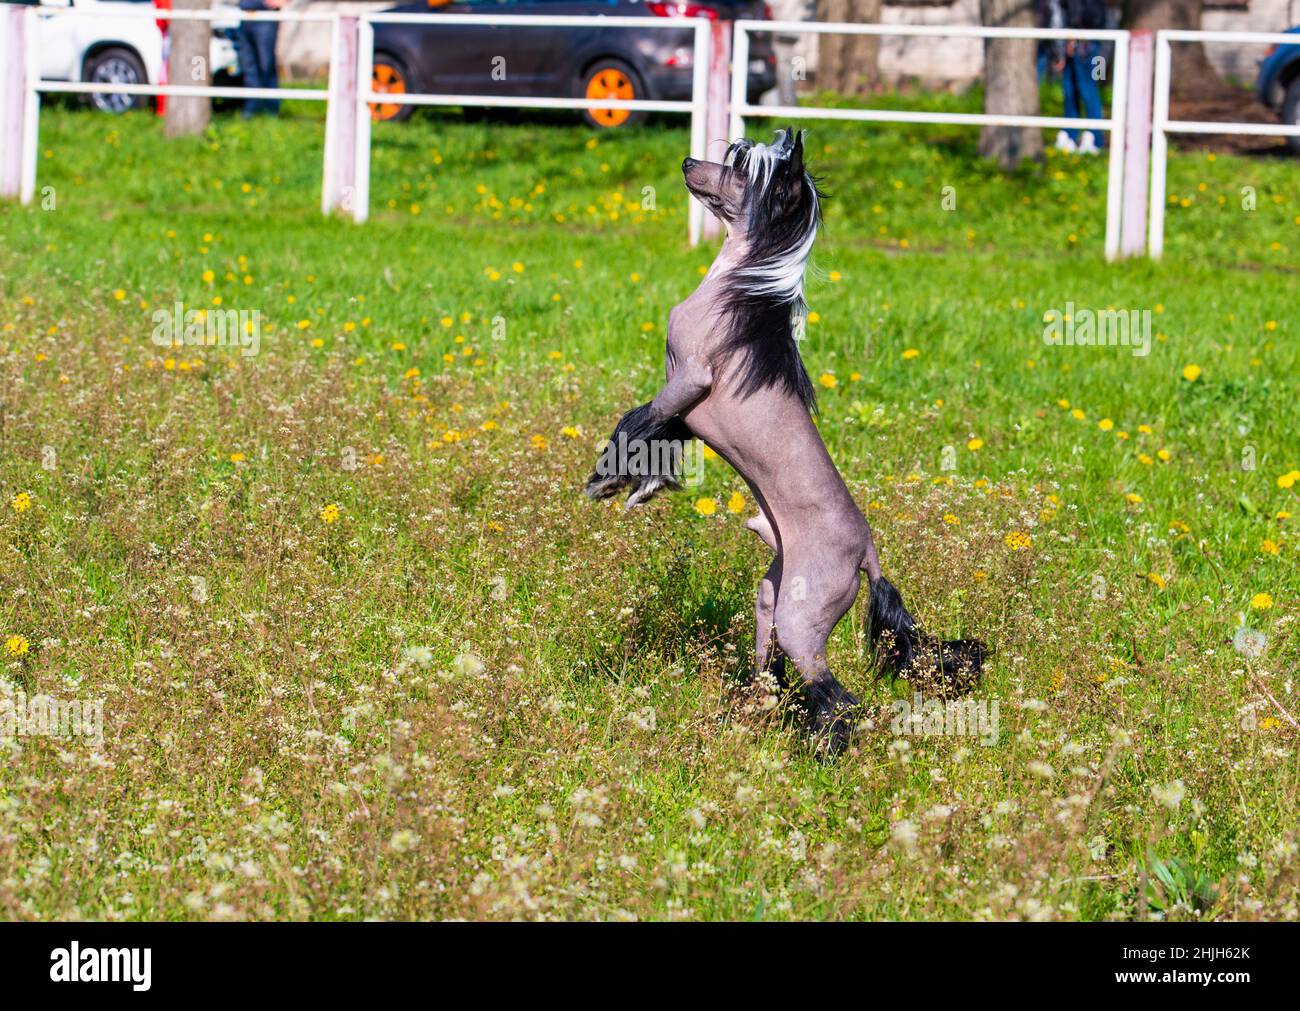 Chinese crested dog upright.    The Chinese crested dog walks on the grass of the park. Stock Photo